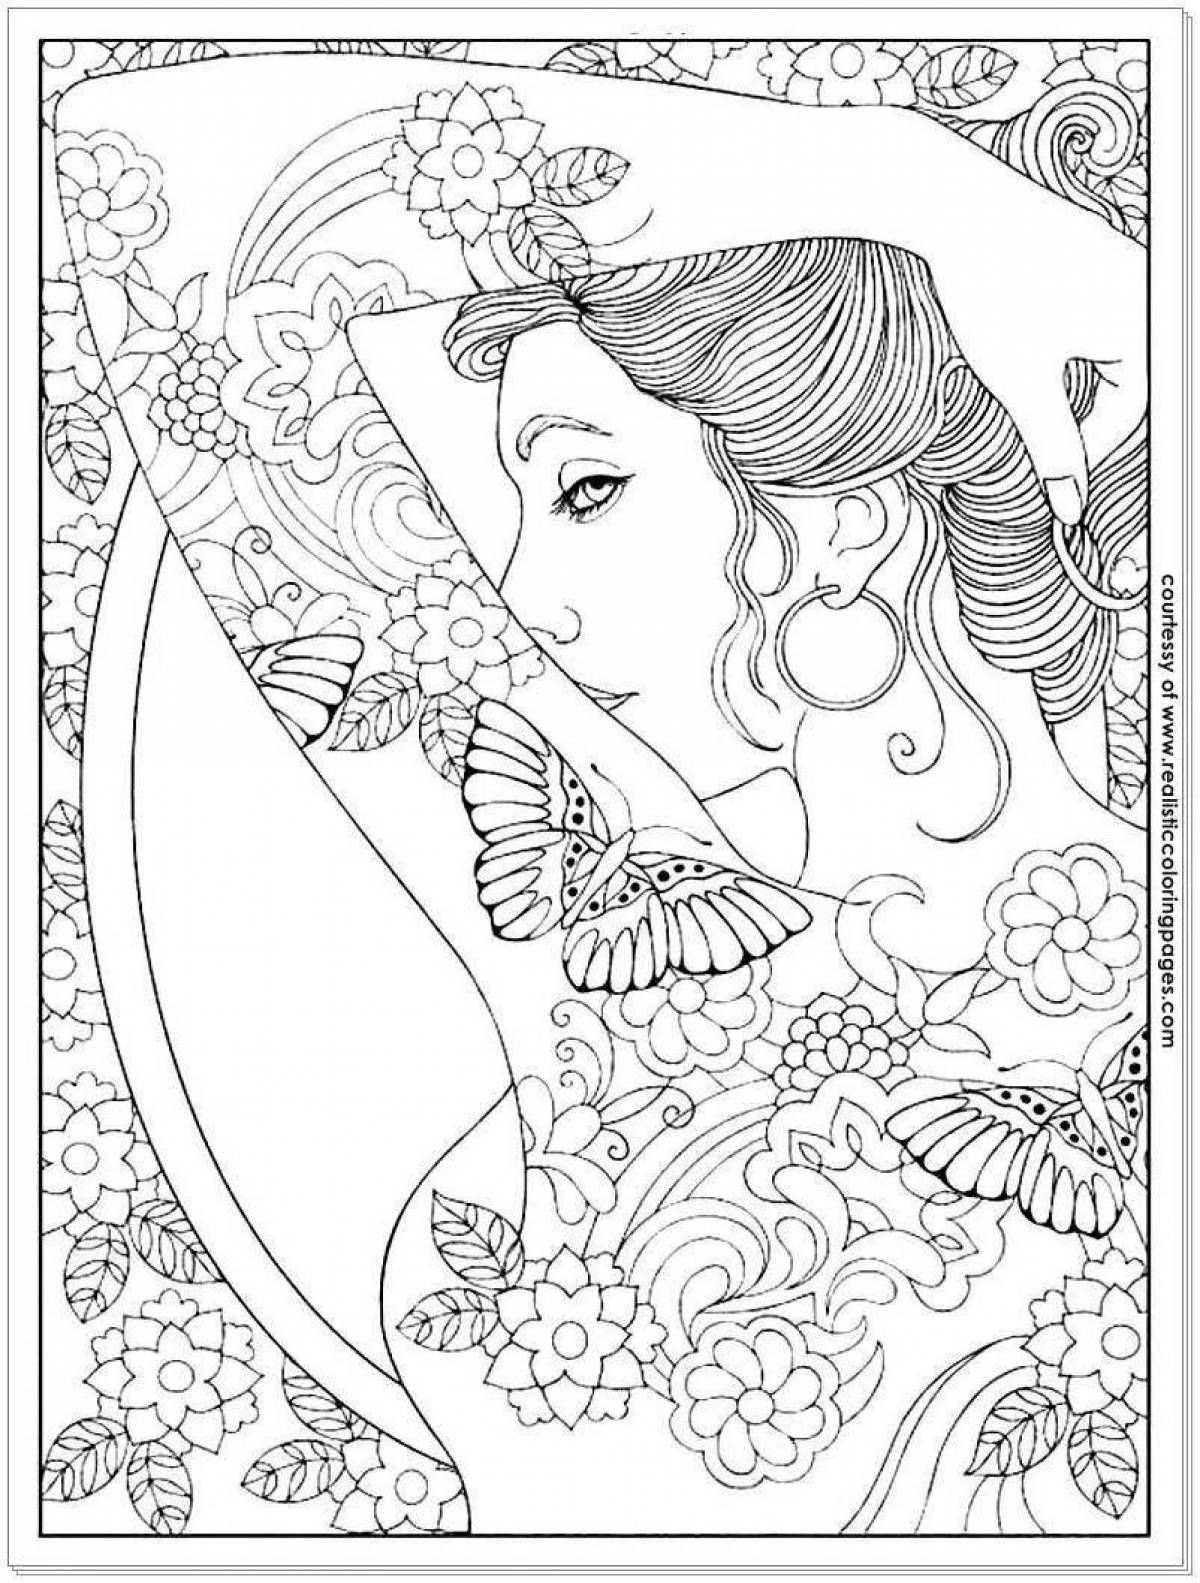 Live coloring for all adult girls